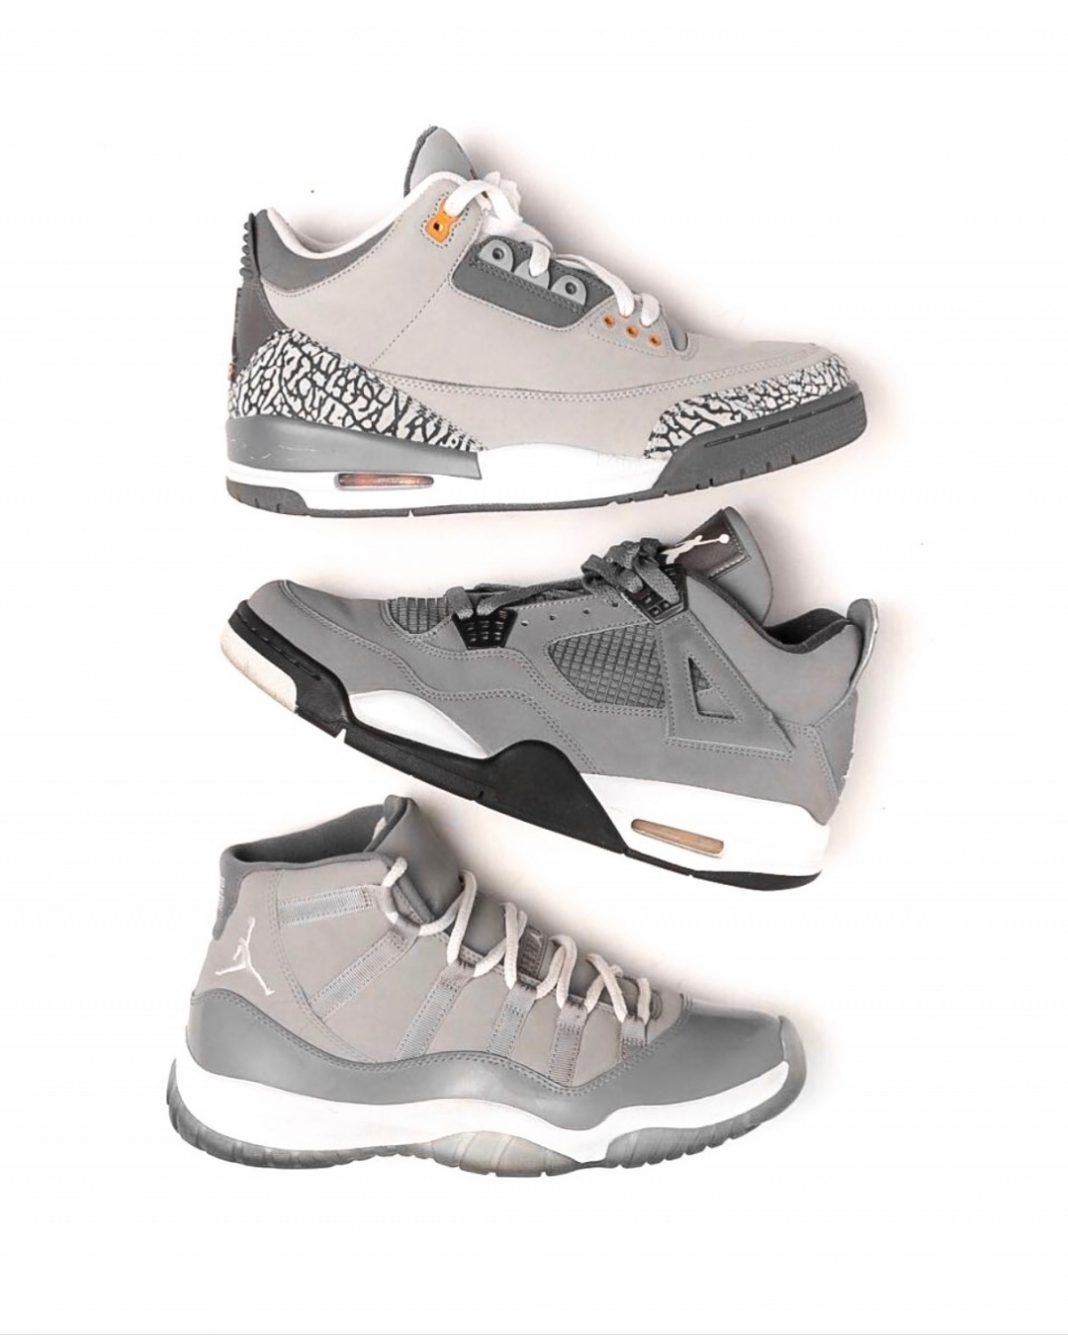 The “Cool Grey” Air Jordan 4 is rumored to be making a return this August for $1...